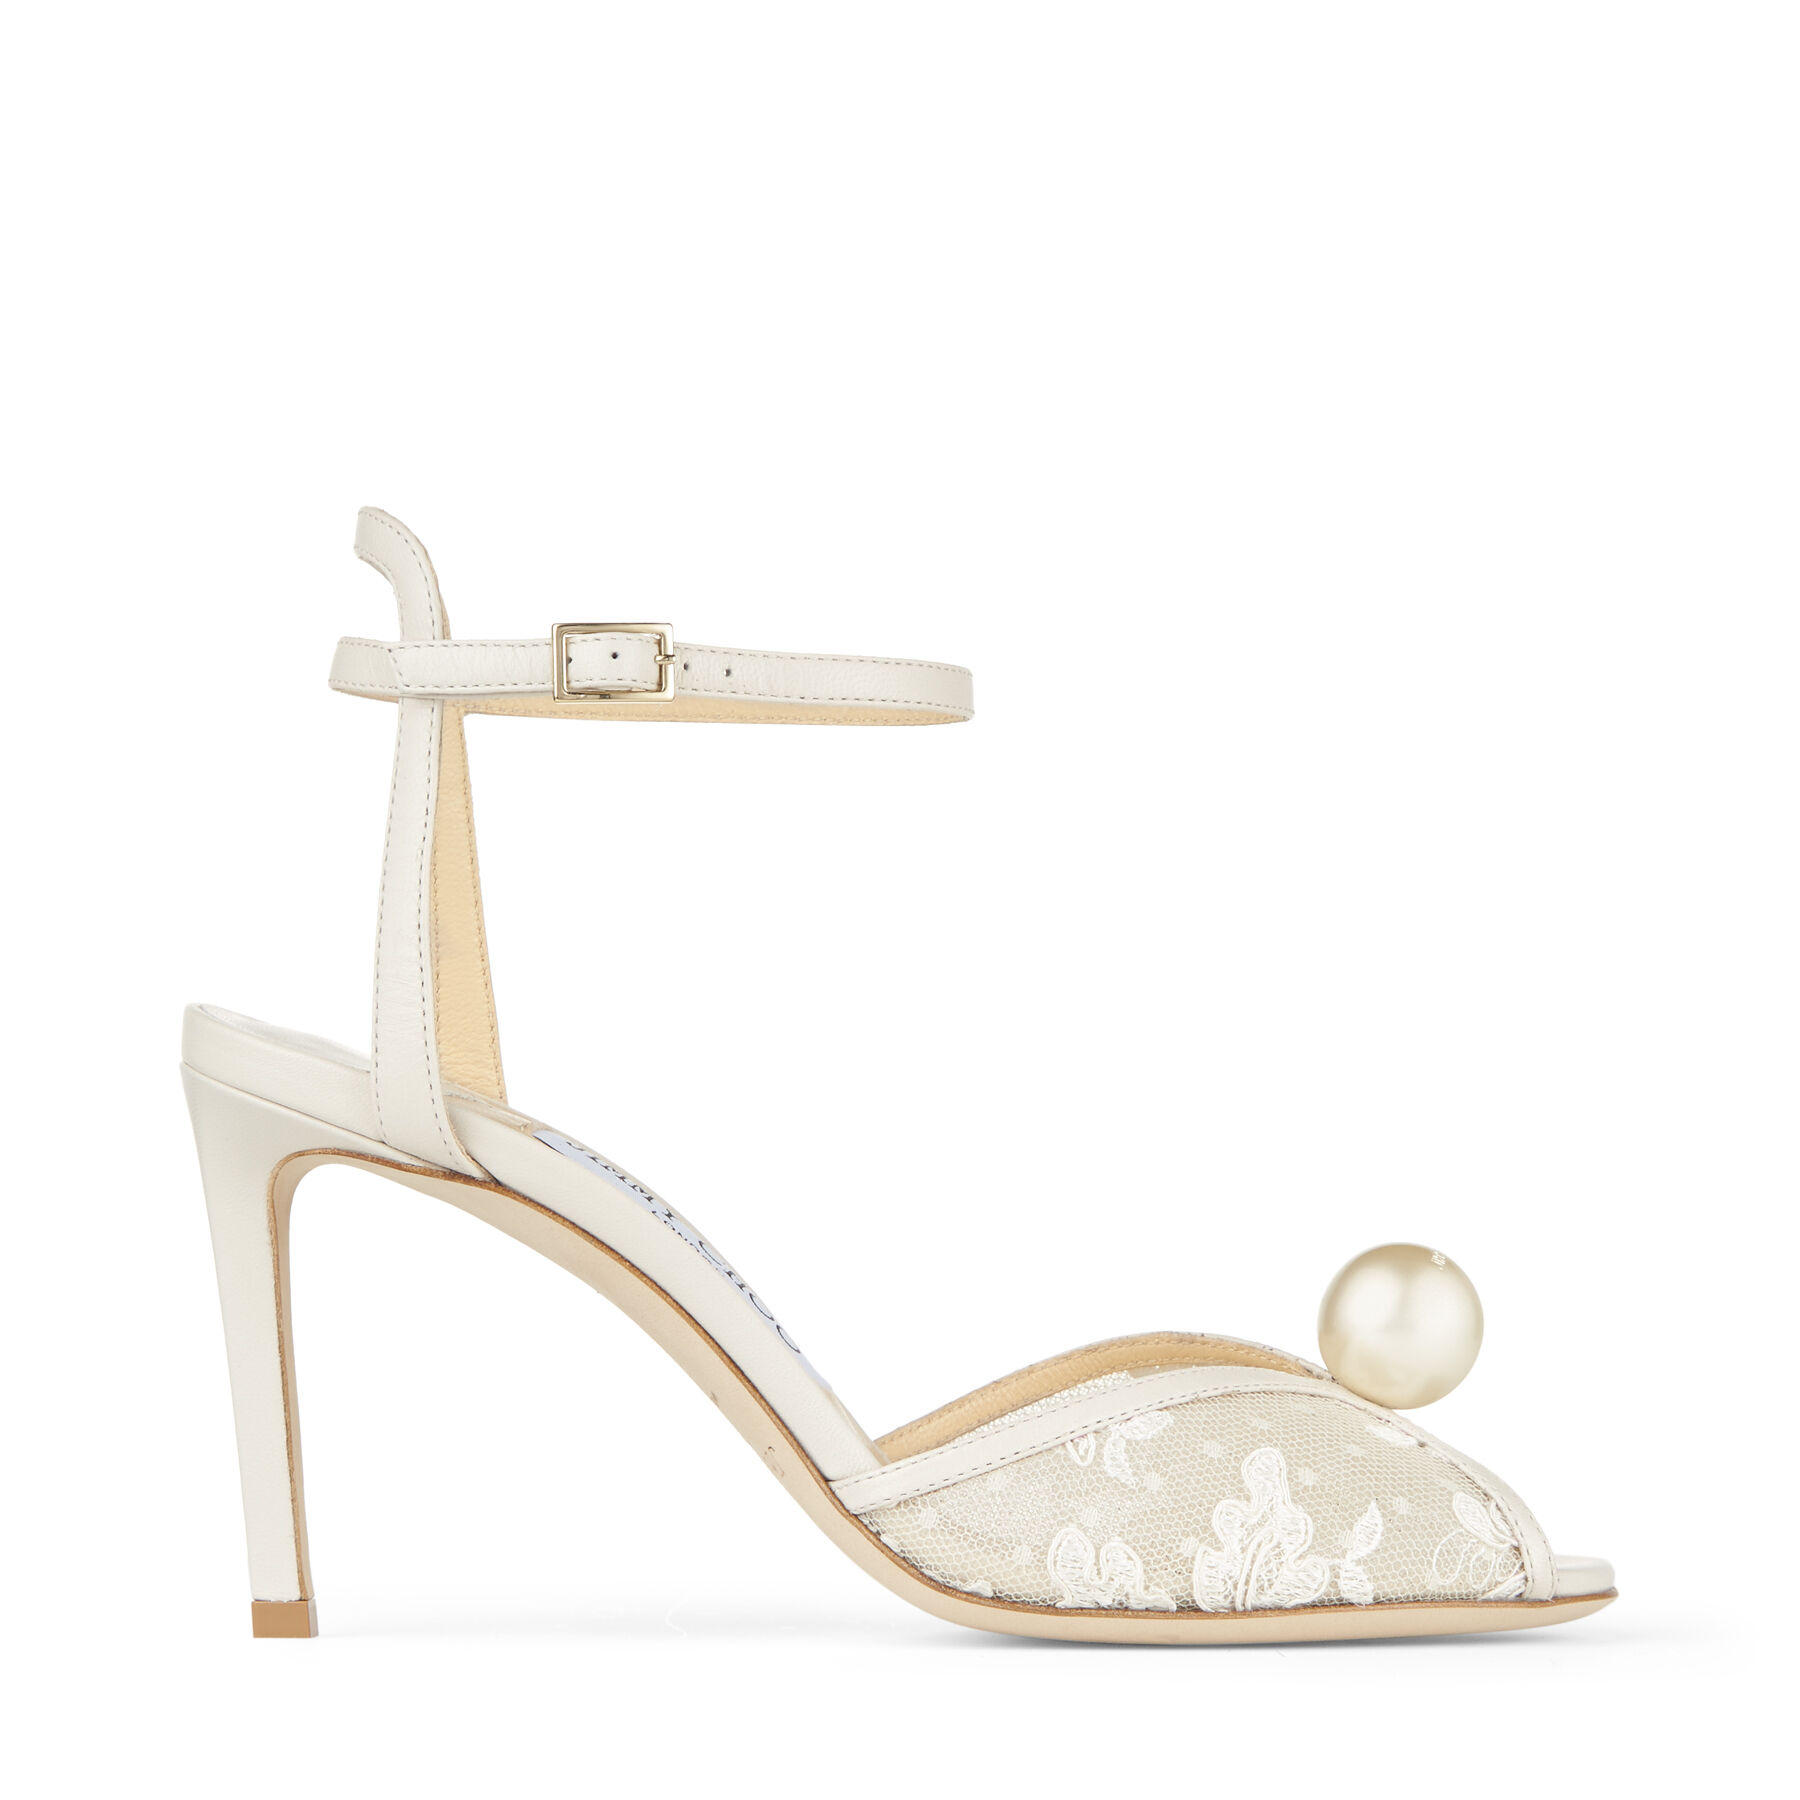 Ivory Lace Sandals with Pearl Detail|SACORA 85 |Cruise '20 |JIMMY CHOO